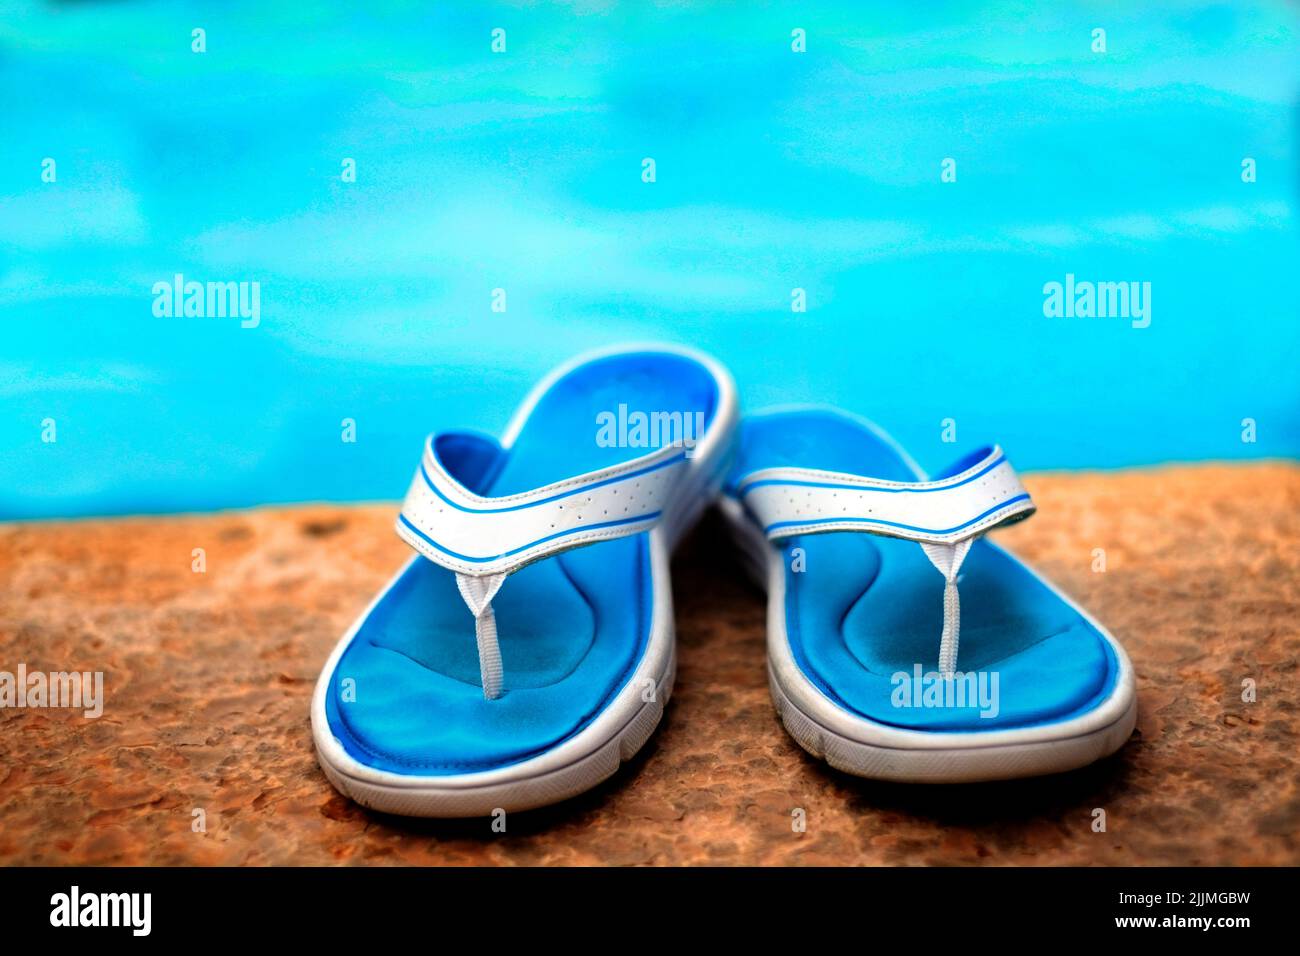 Pair of sandals flip flops next to clear swimming pool with blue water Stock Photo